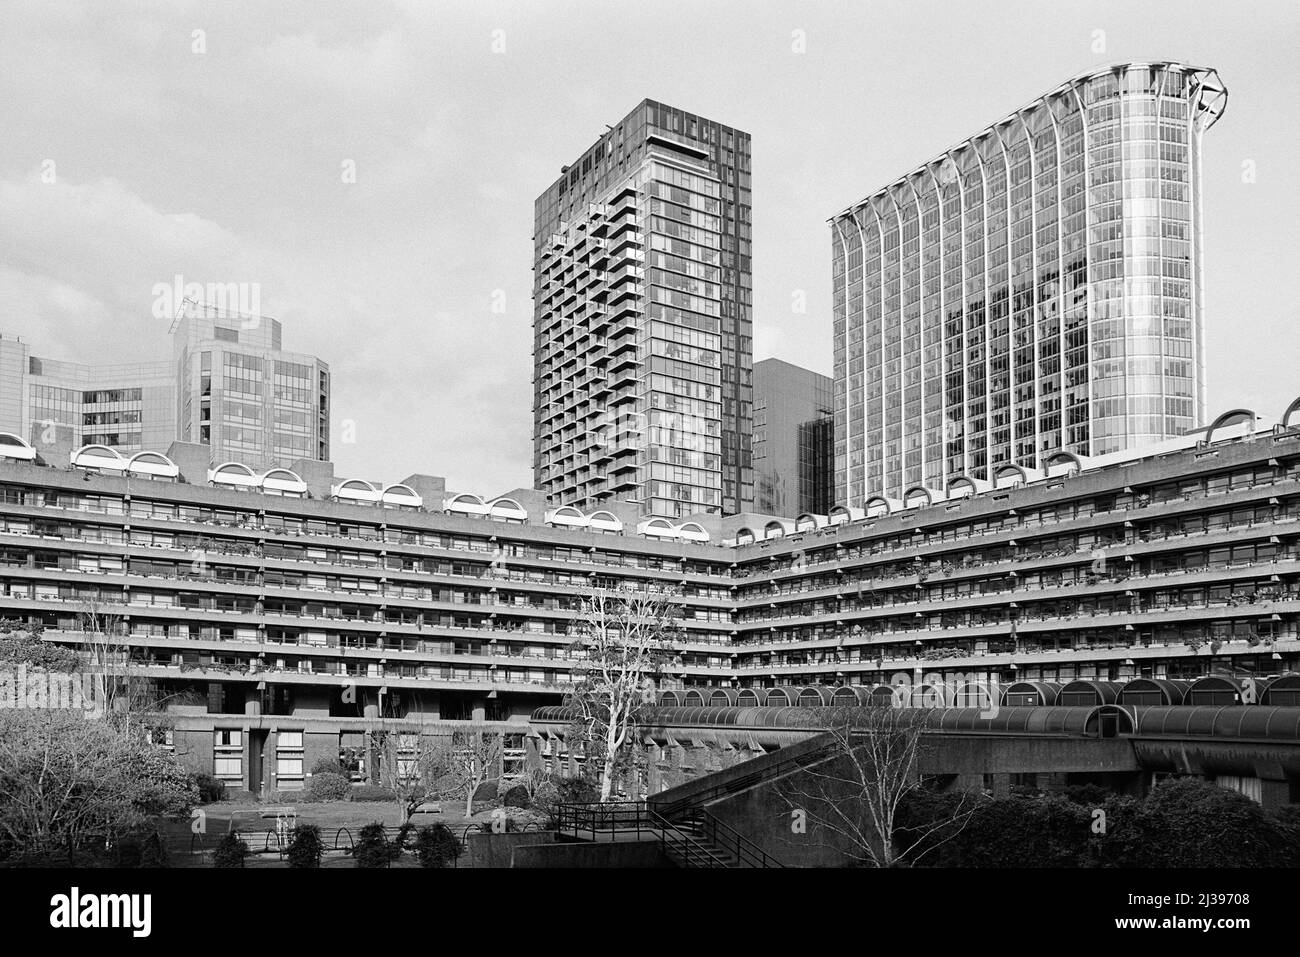 Apartments on the Barbican Estate in the City of London, South East England Stock Photo